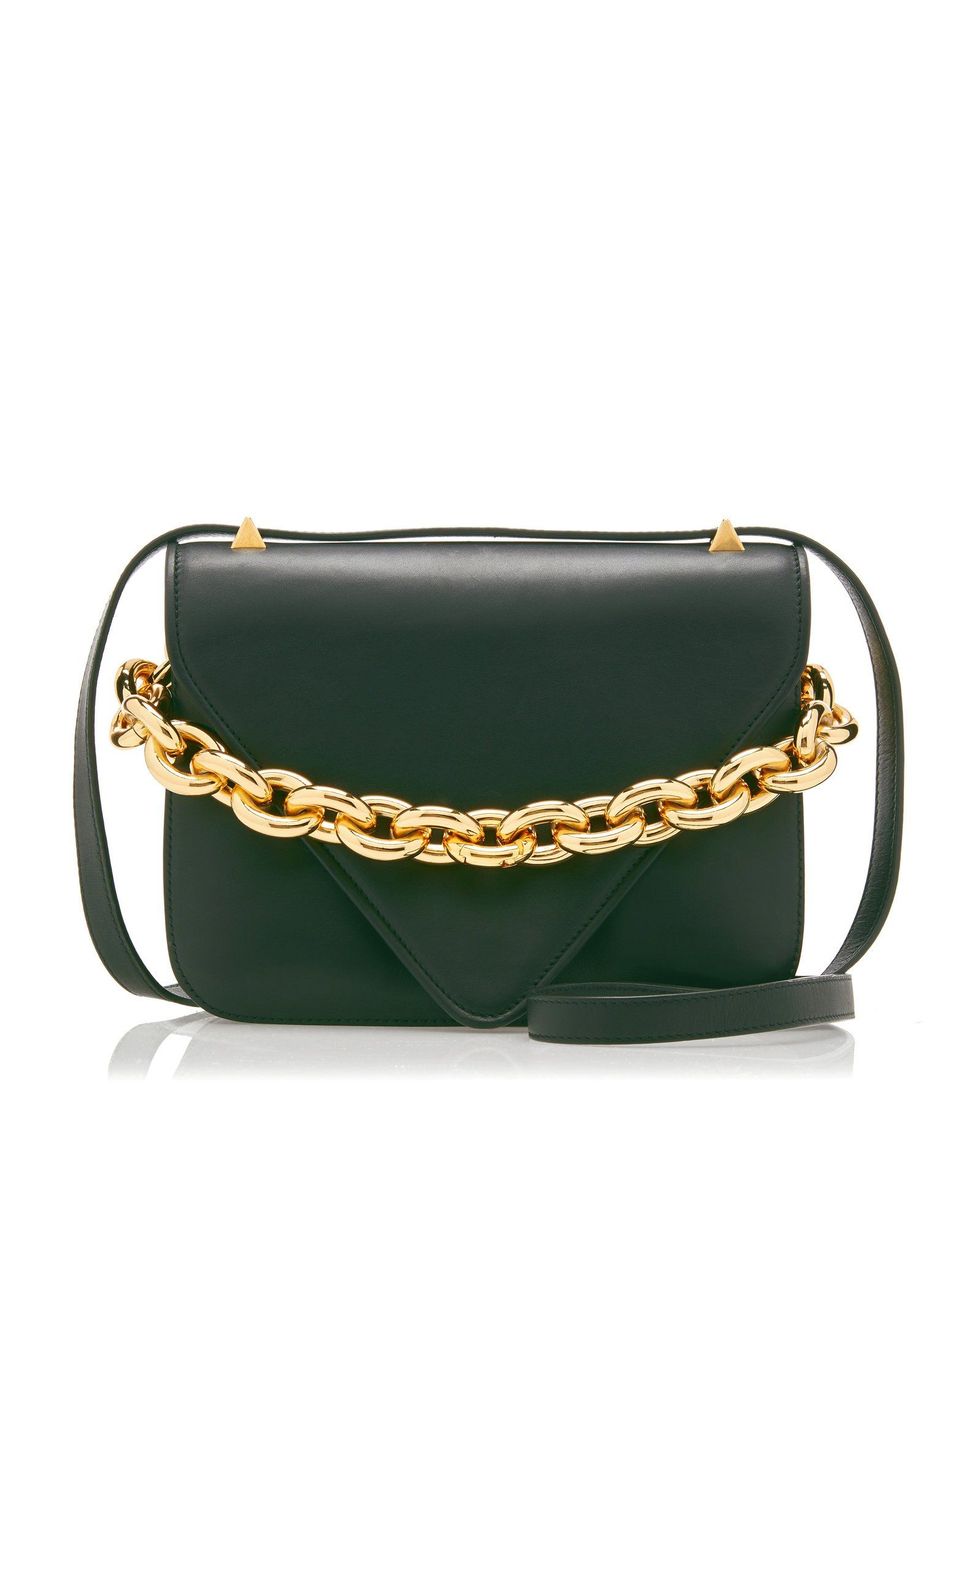 9 Up-and-Coming Handbag Brands to Shop for Fall - Fashionista